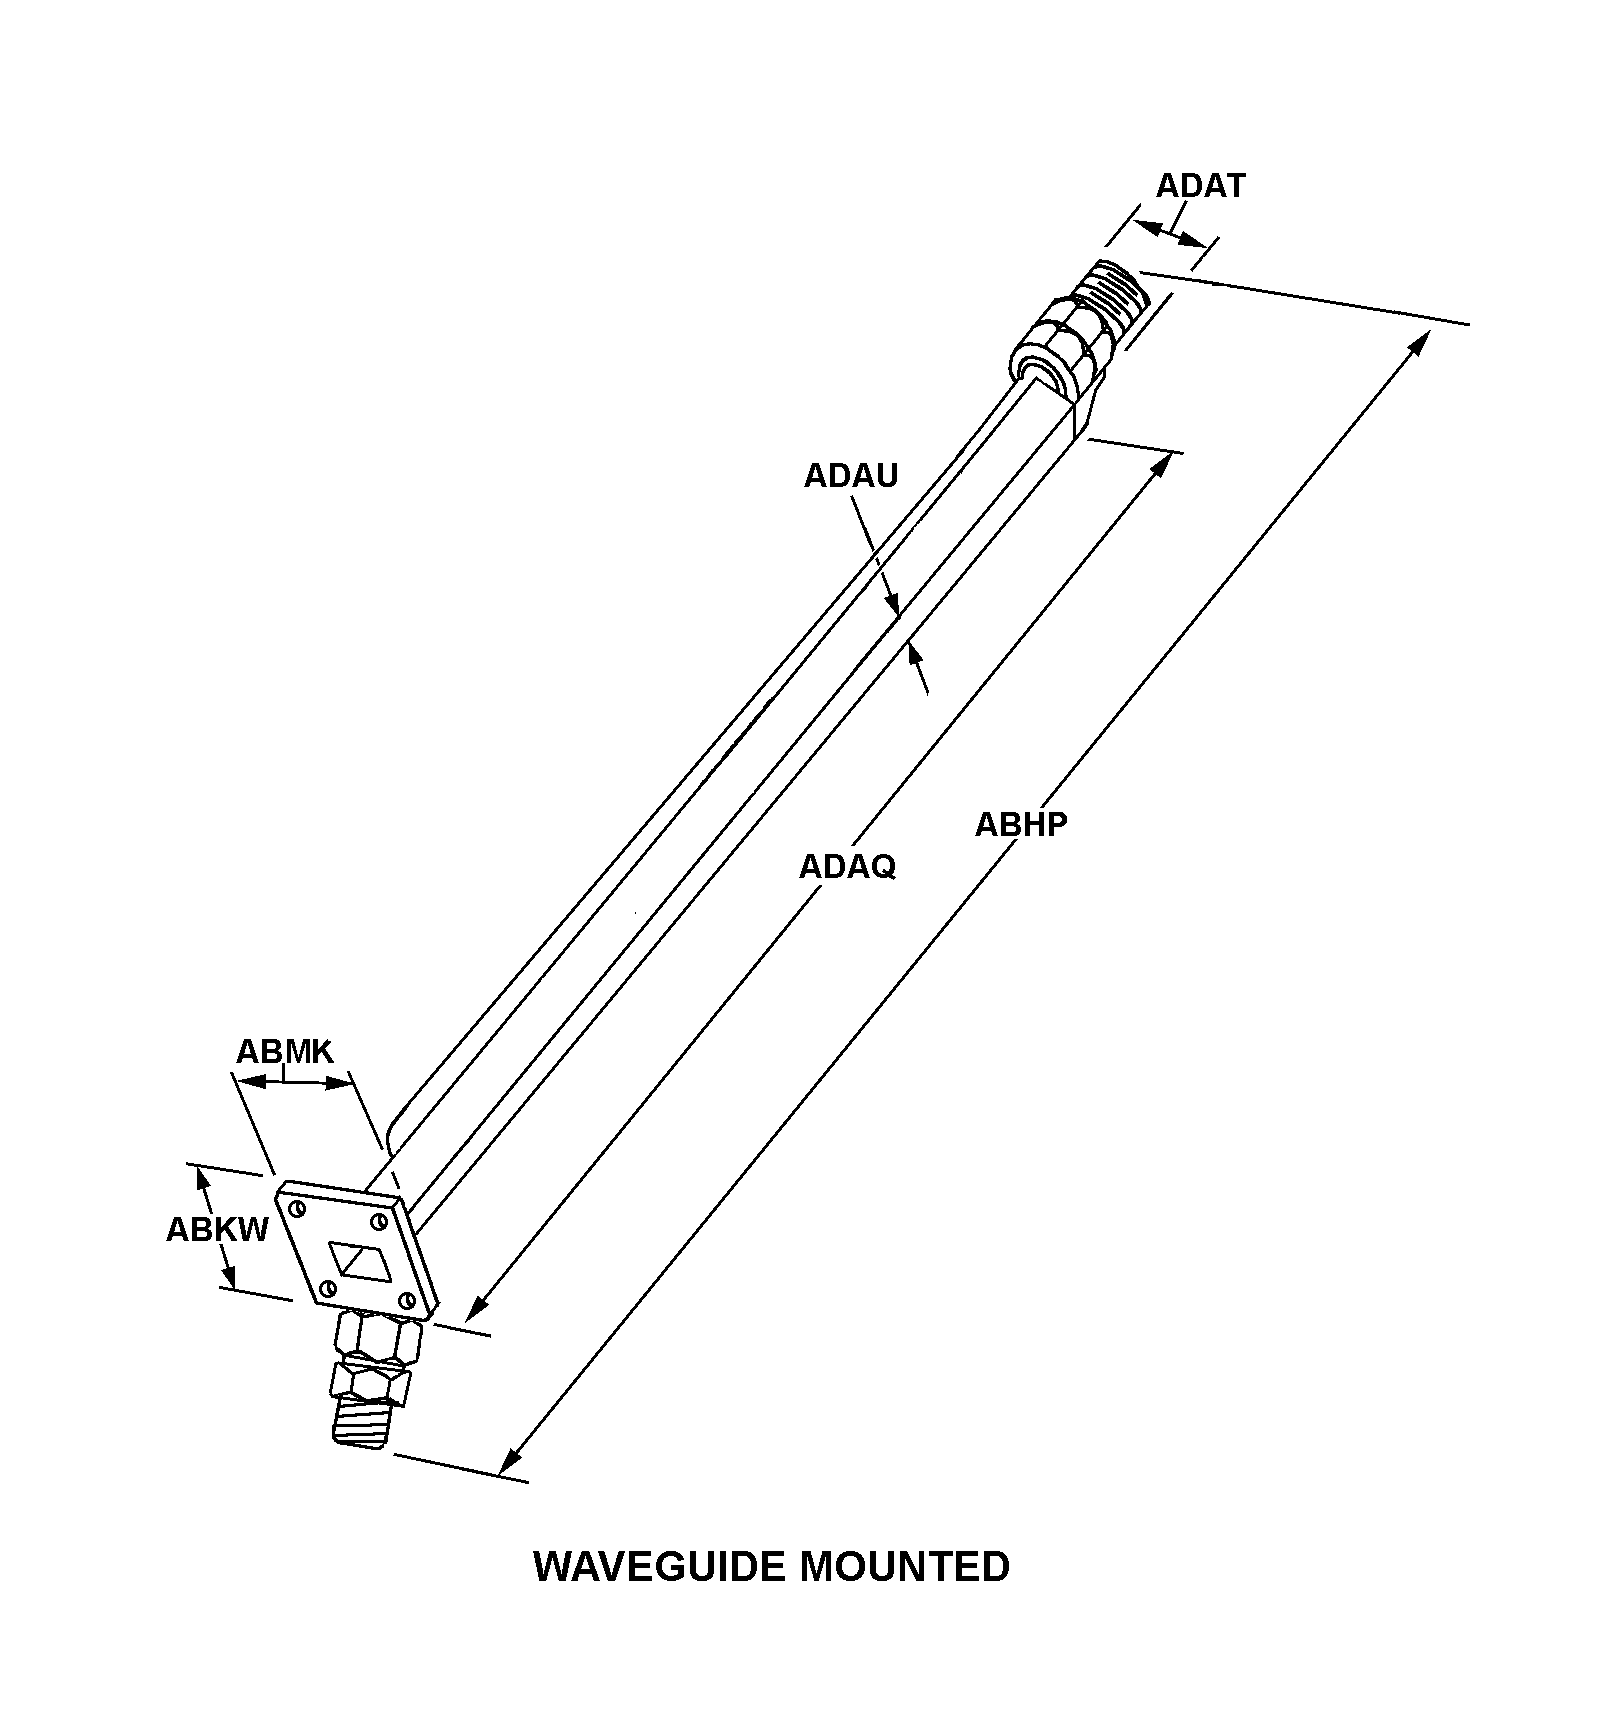 WAVEGUIDE MOUNTED style nsn 5985-01-078-7296